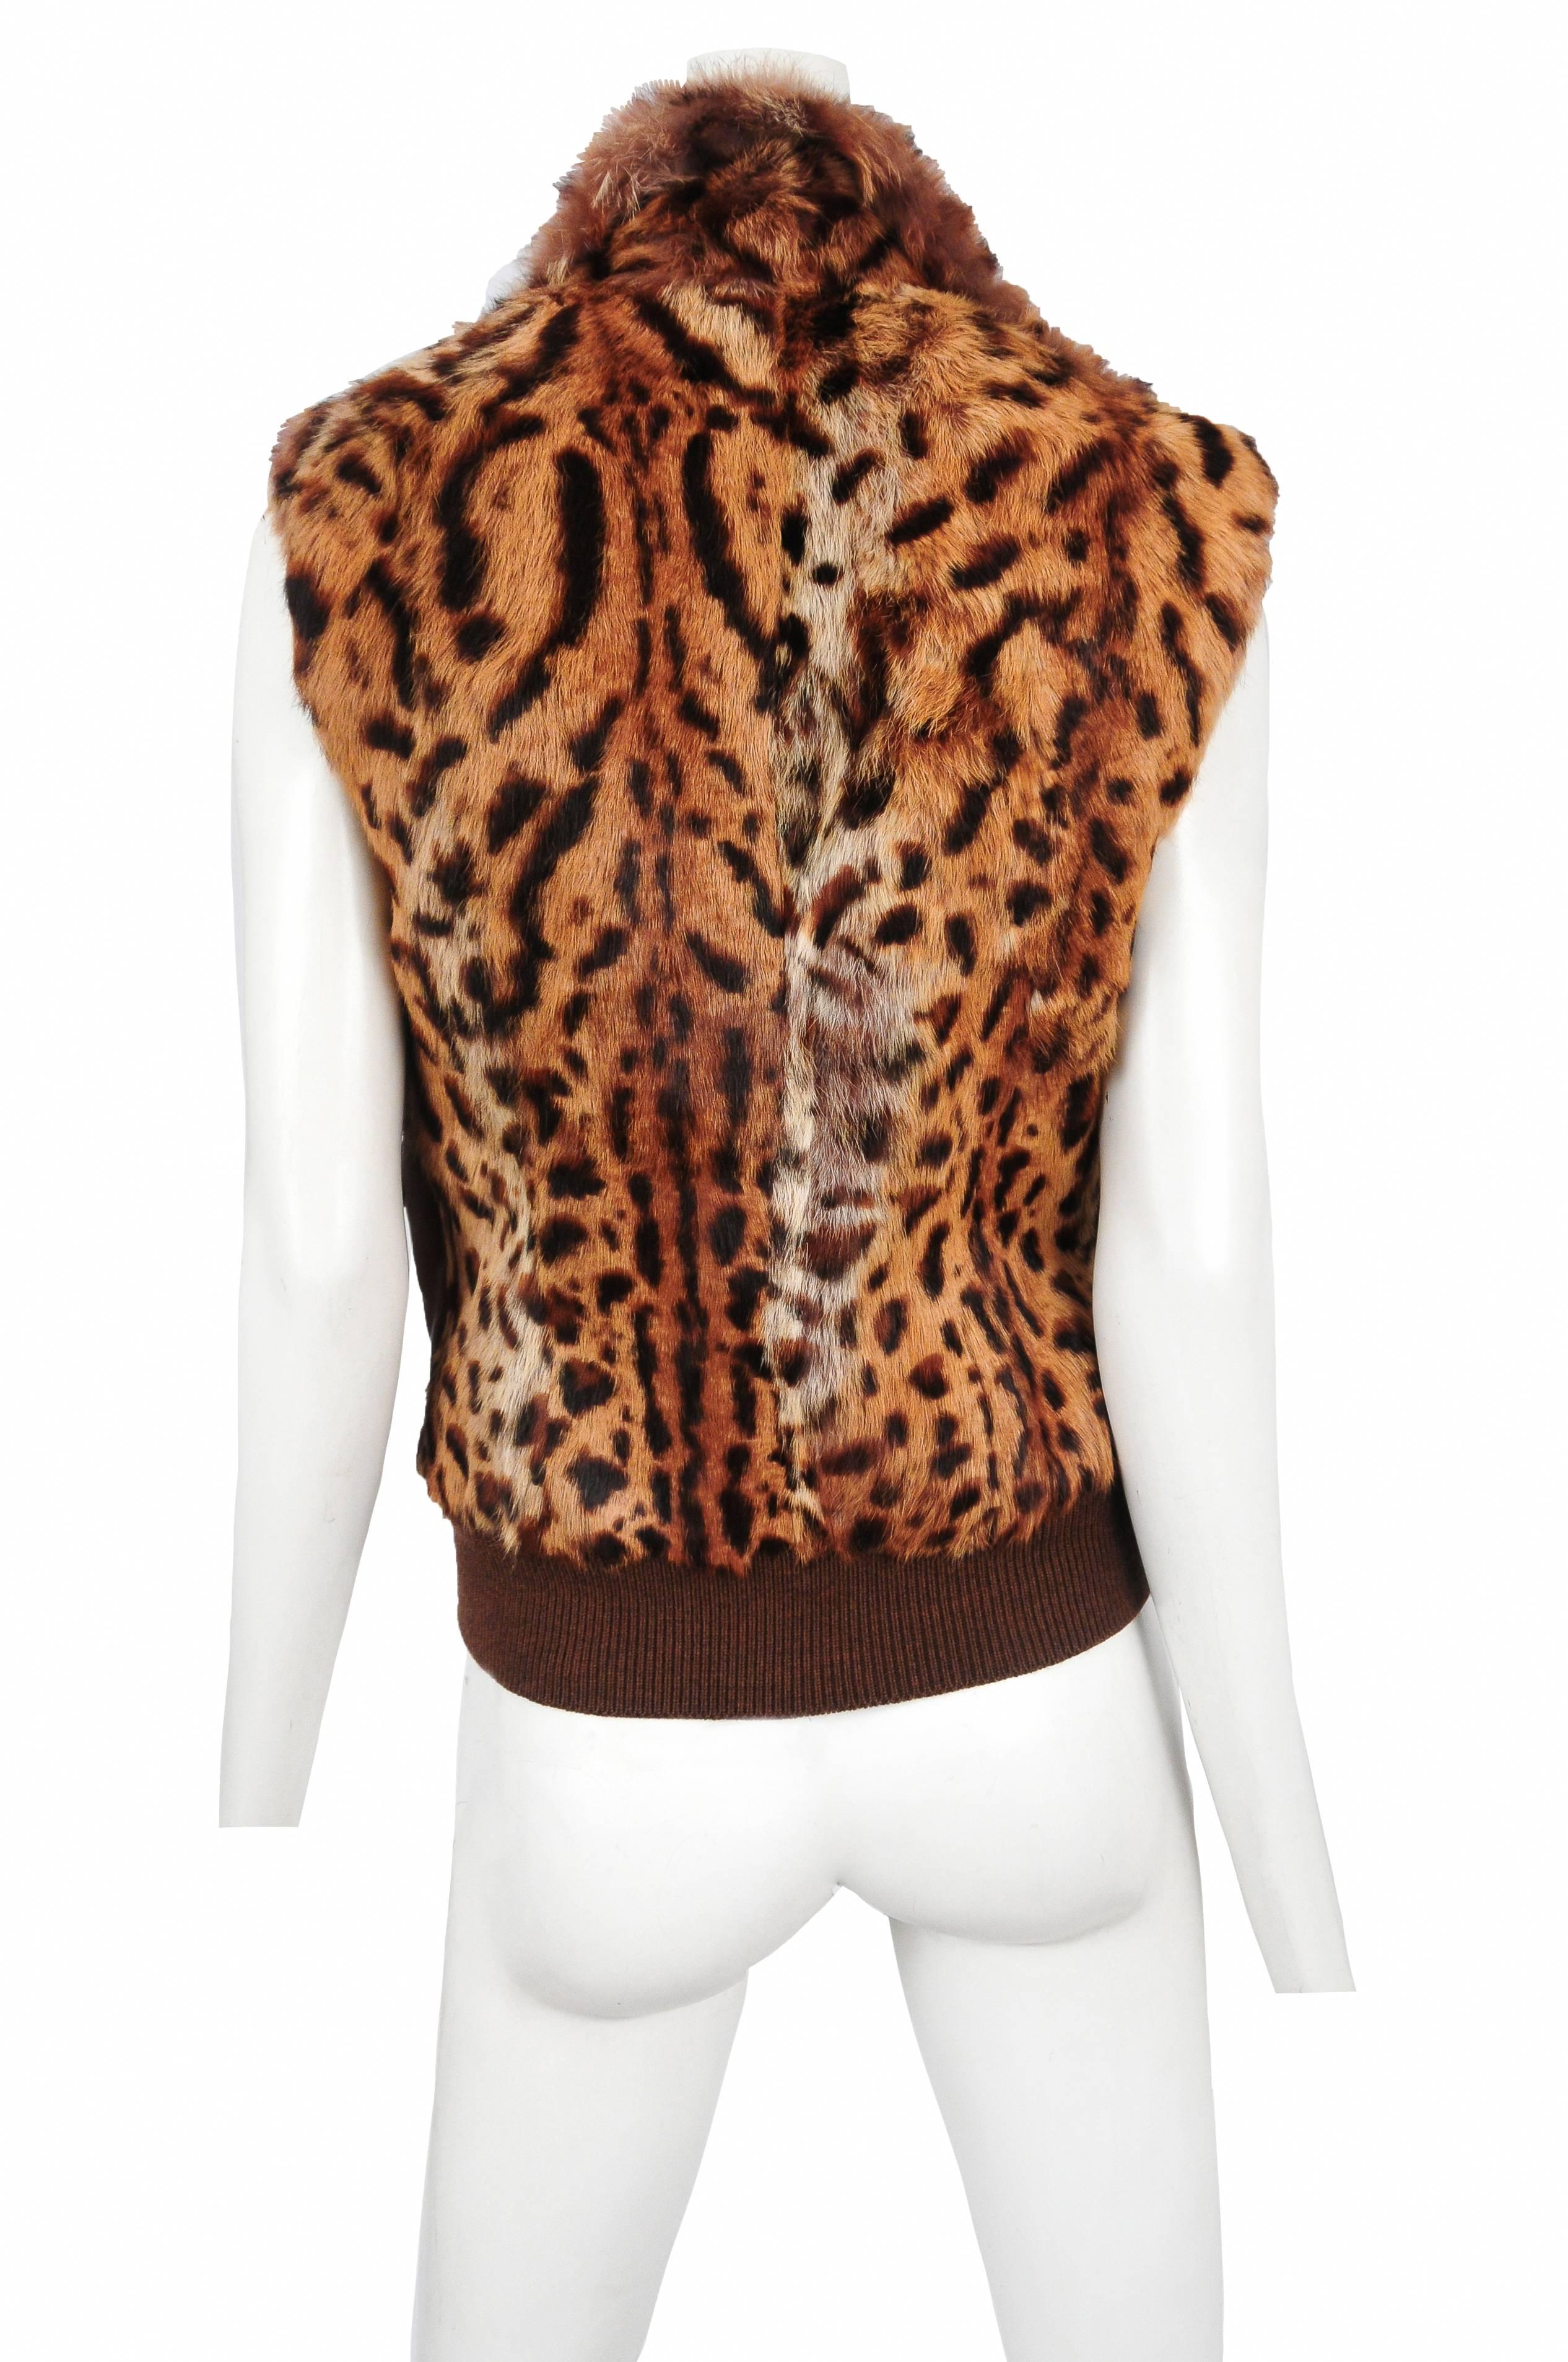 Vintage John Galliano for Christian Dior brown leather and leopard print rabbit fur vest featuring four brass buckled pockets at torso and a front zip closure.